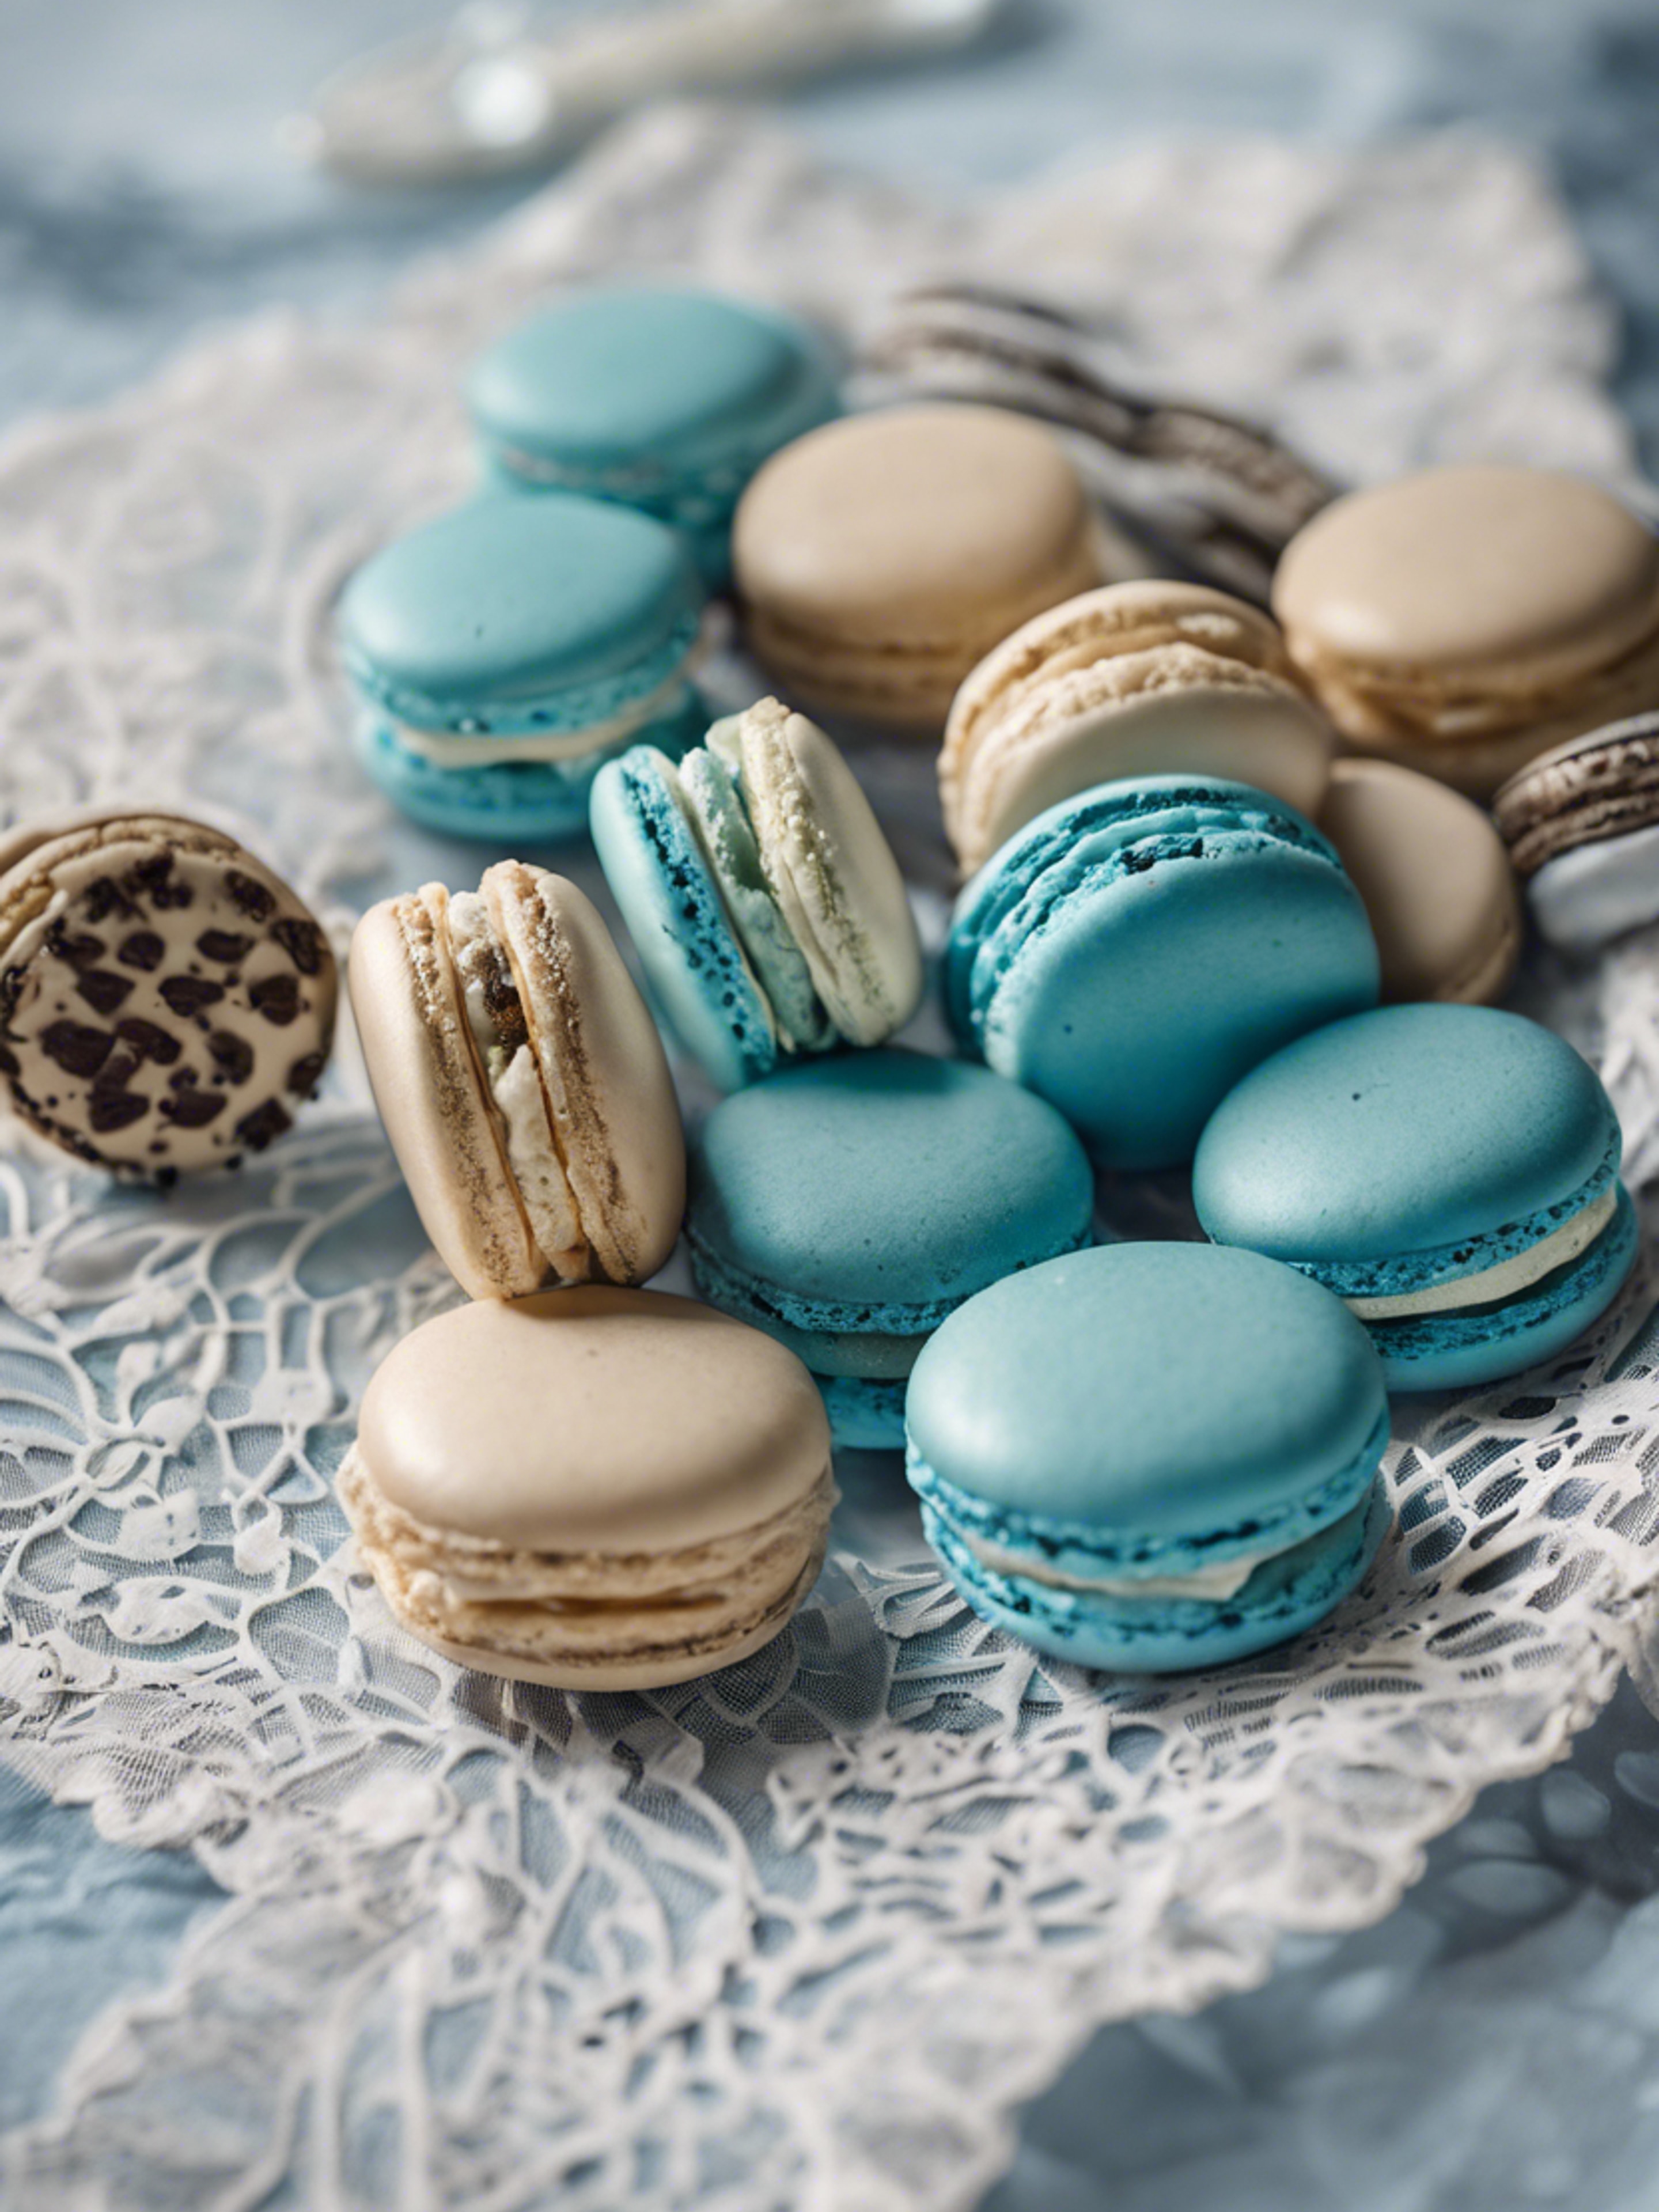 Blue French Macarons artistically arranged on an antique white lace tablecloth. Hình nền[73469cabdbbf44728762]